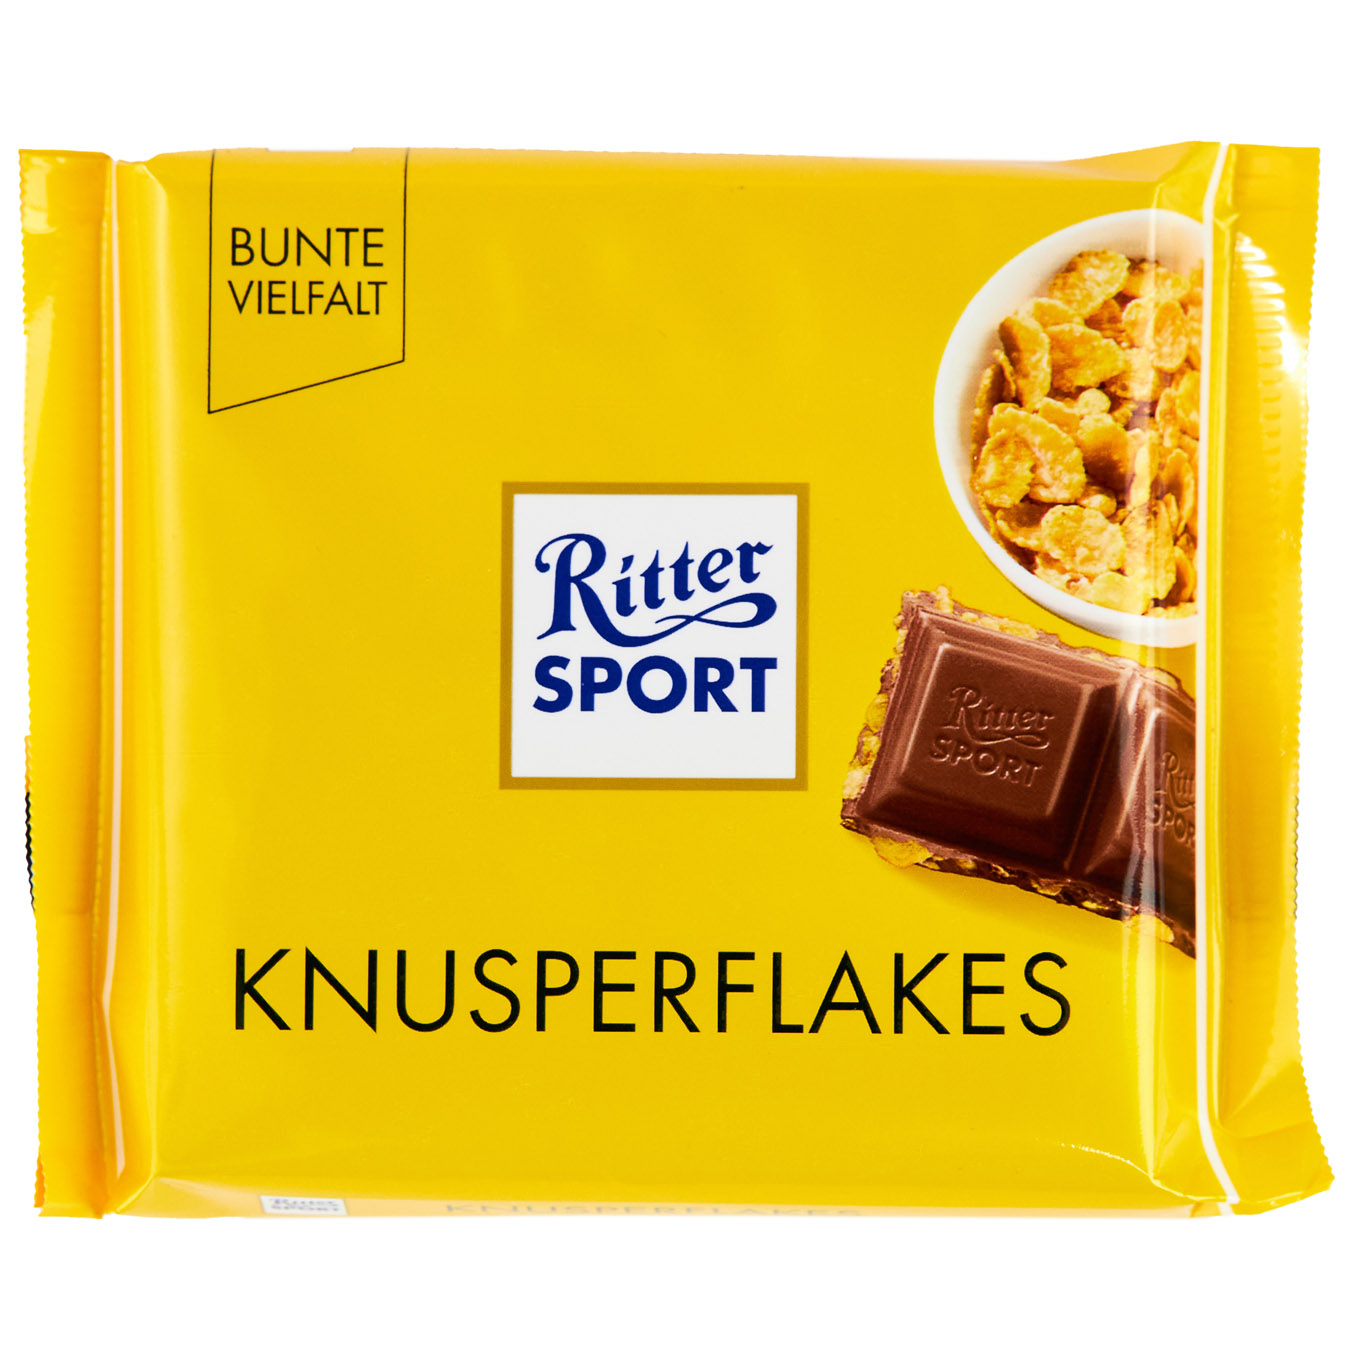 Ritter Sport chocolate with flakes 100g